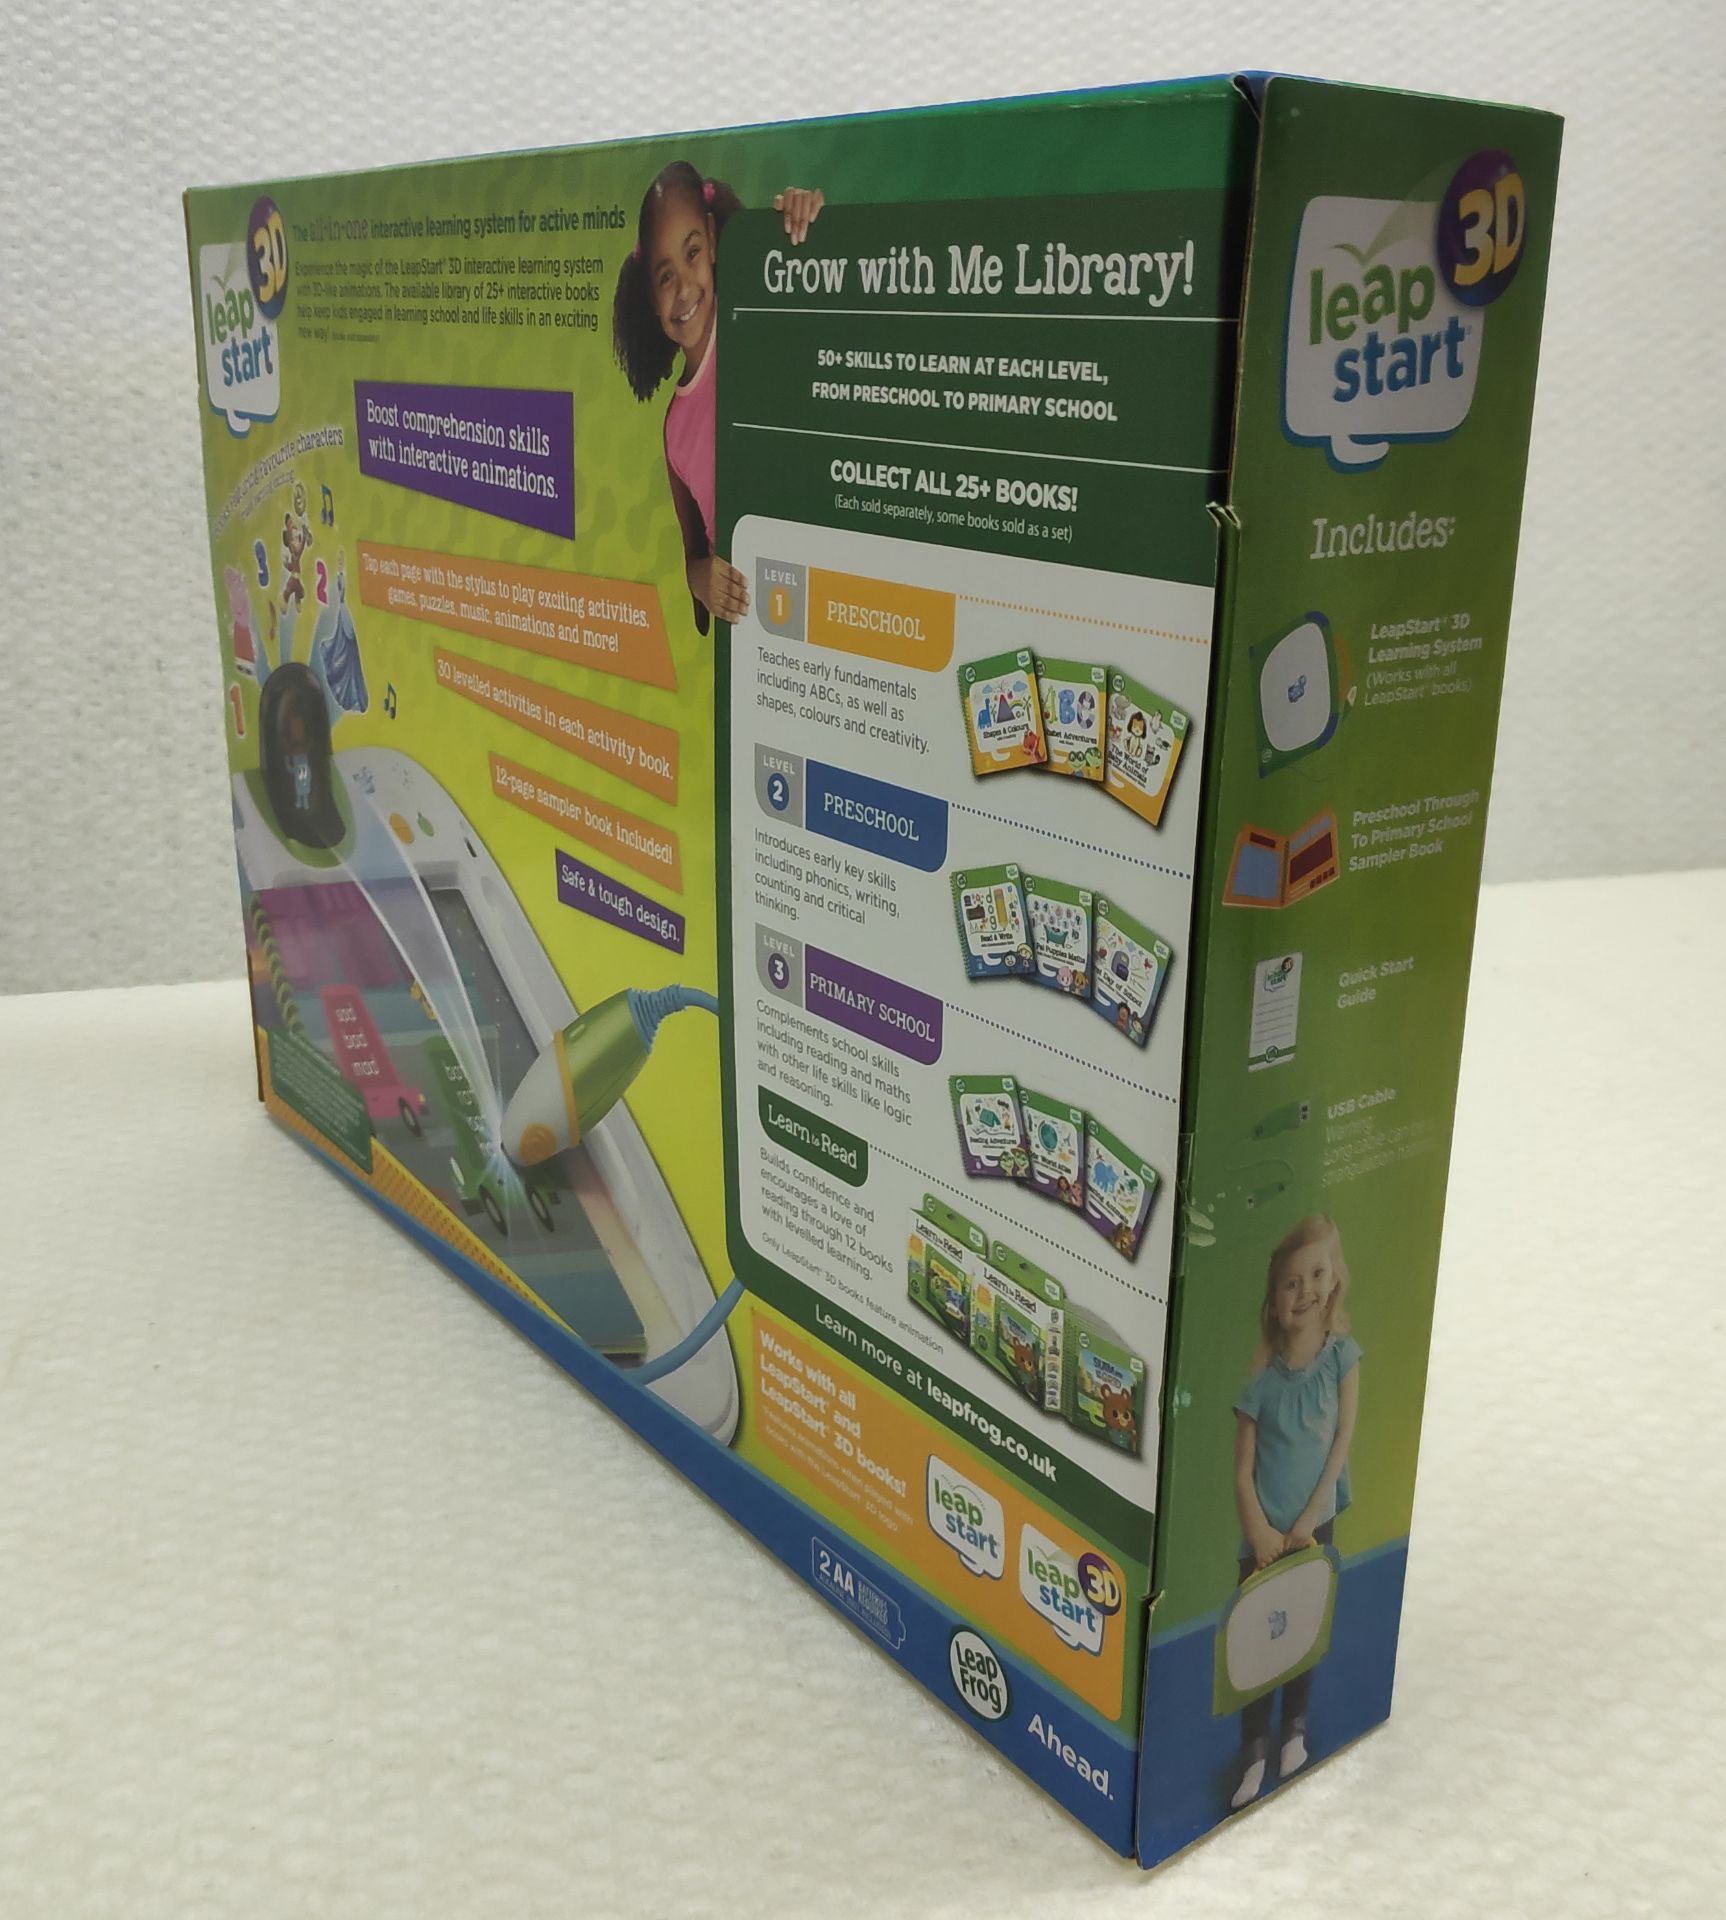 1 x LeapFrog LeapStart 3D Interactive Learing System - New/Boxed - Image 2 of 6